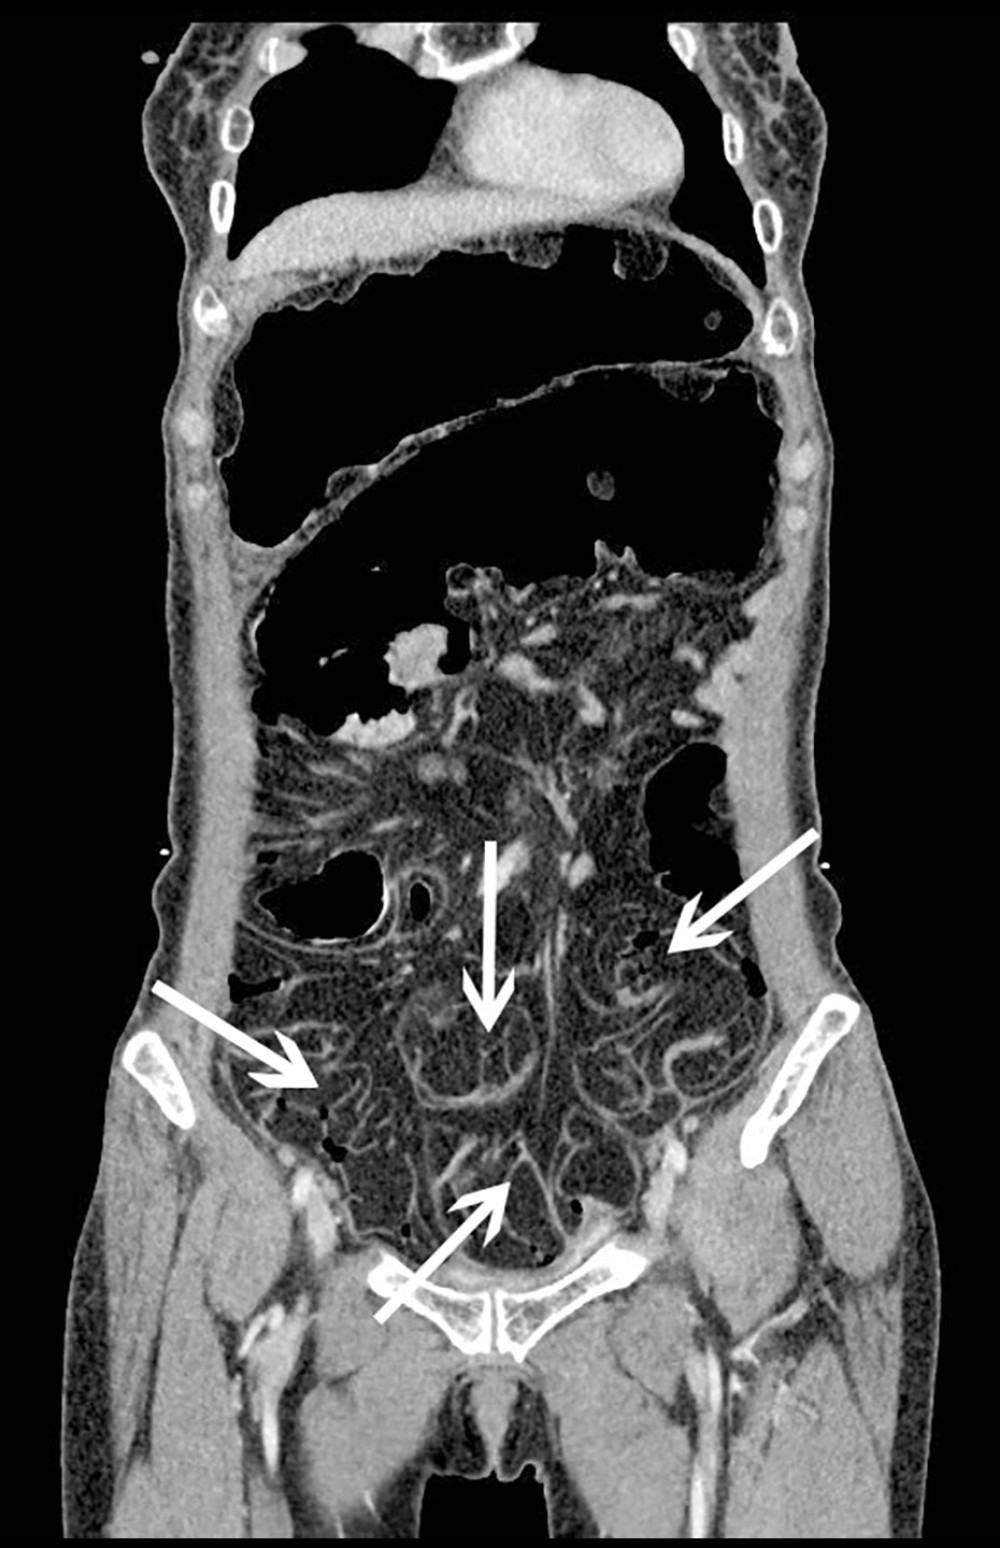 Abdominal contrast-enhanced computed tomography coronal image of a 58-year-old woman with diffuse intestinal lipomatosis. The white arrow indicates multiple lipomas in the small intestine.